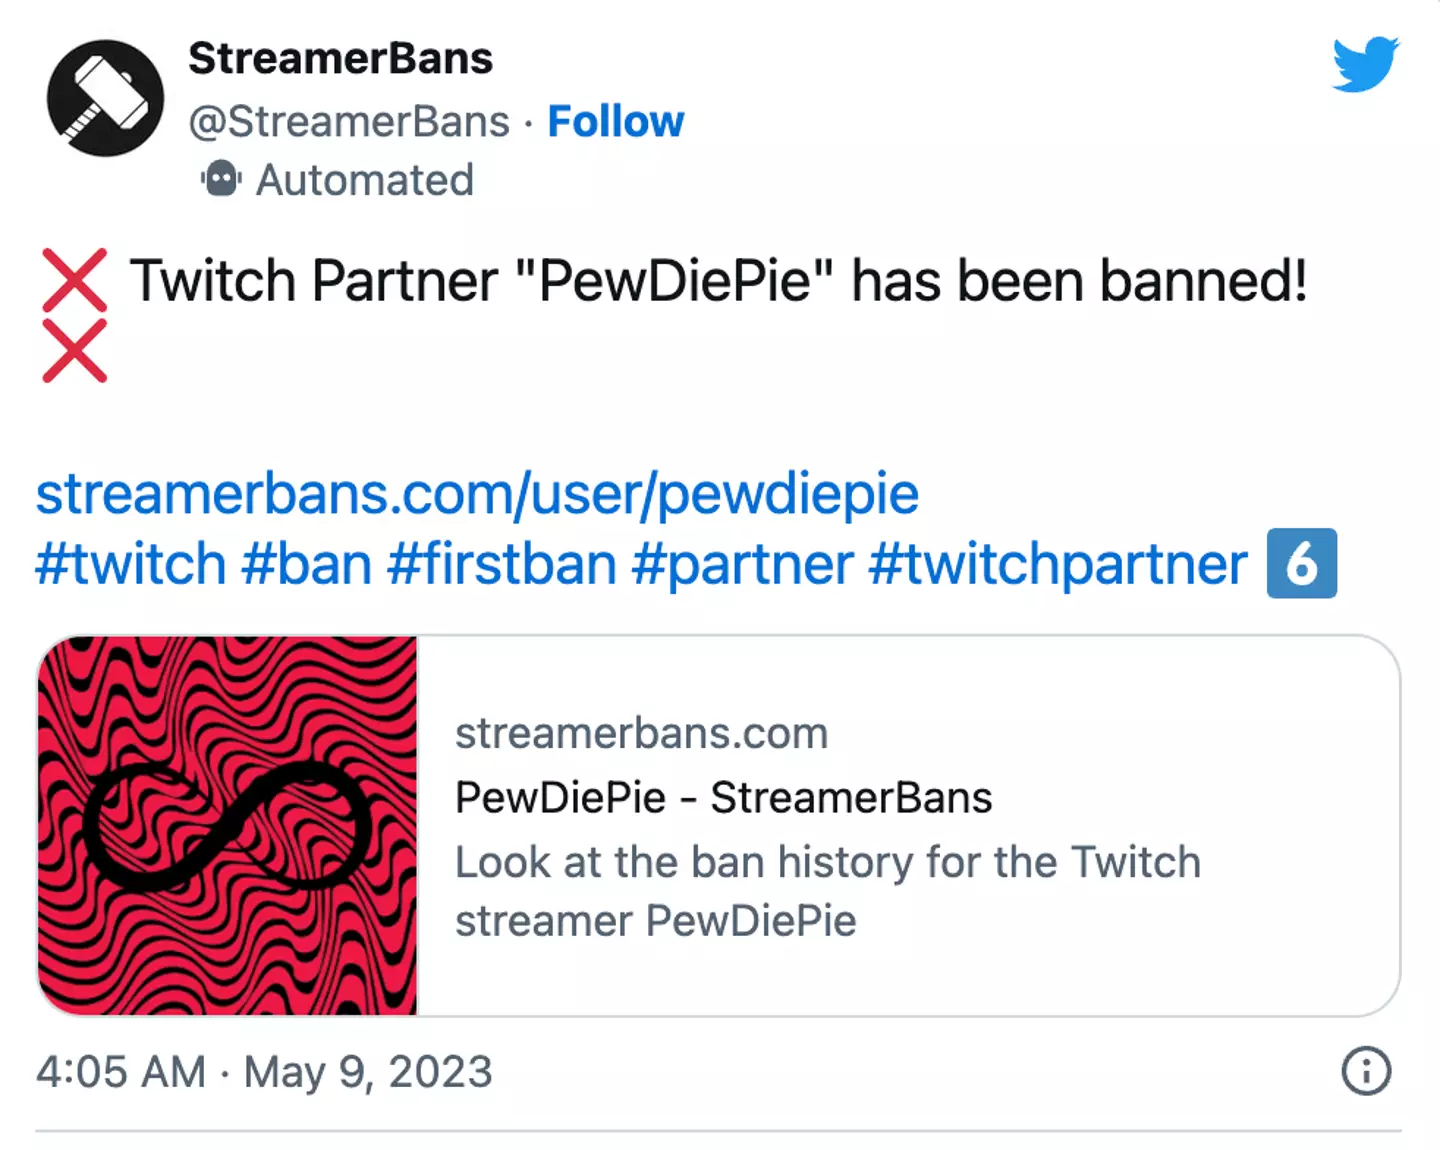 PewDiePie's ban was shared by a bot on Twitter.